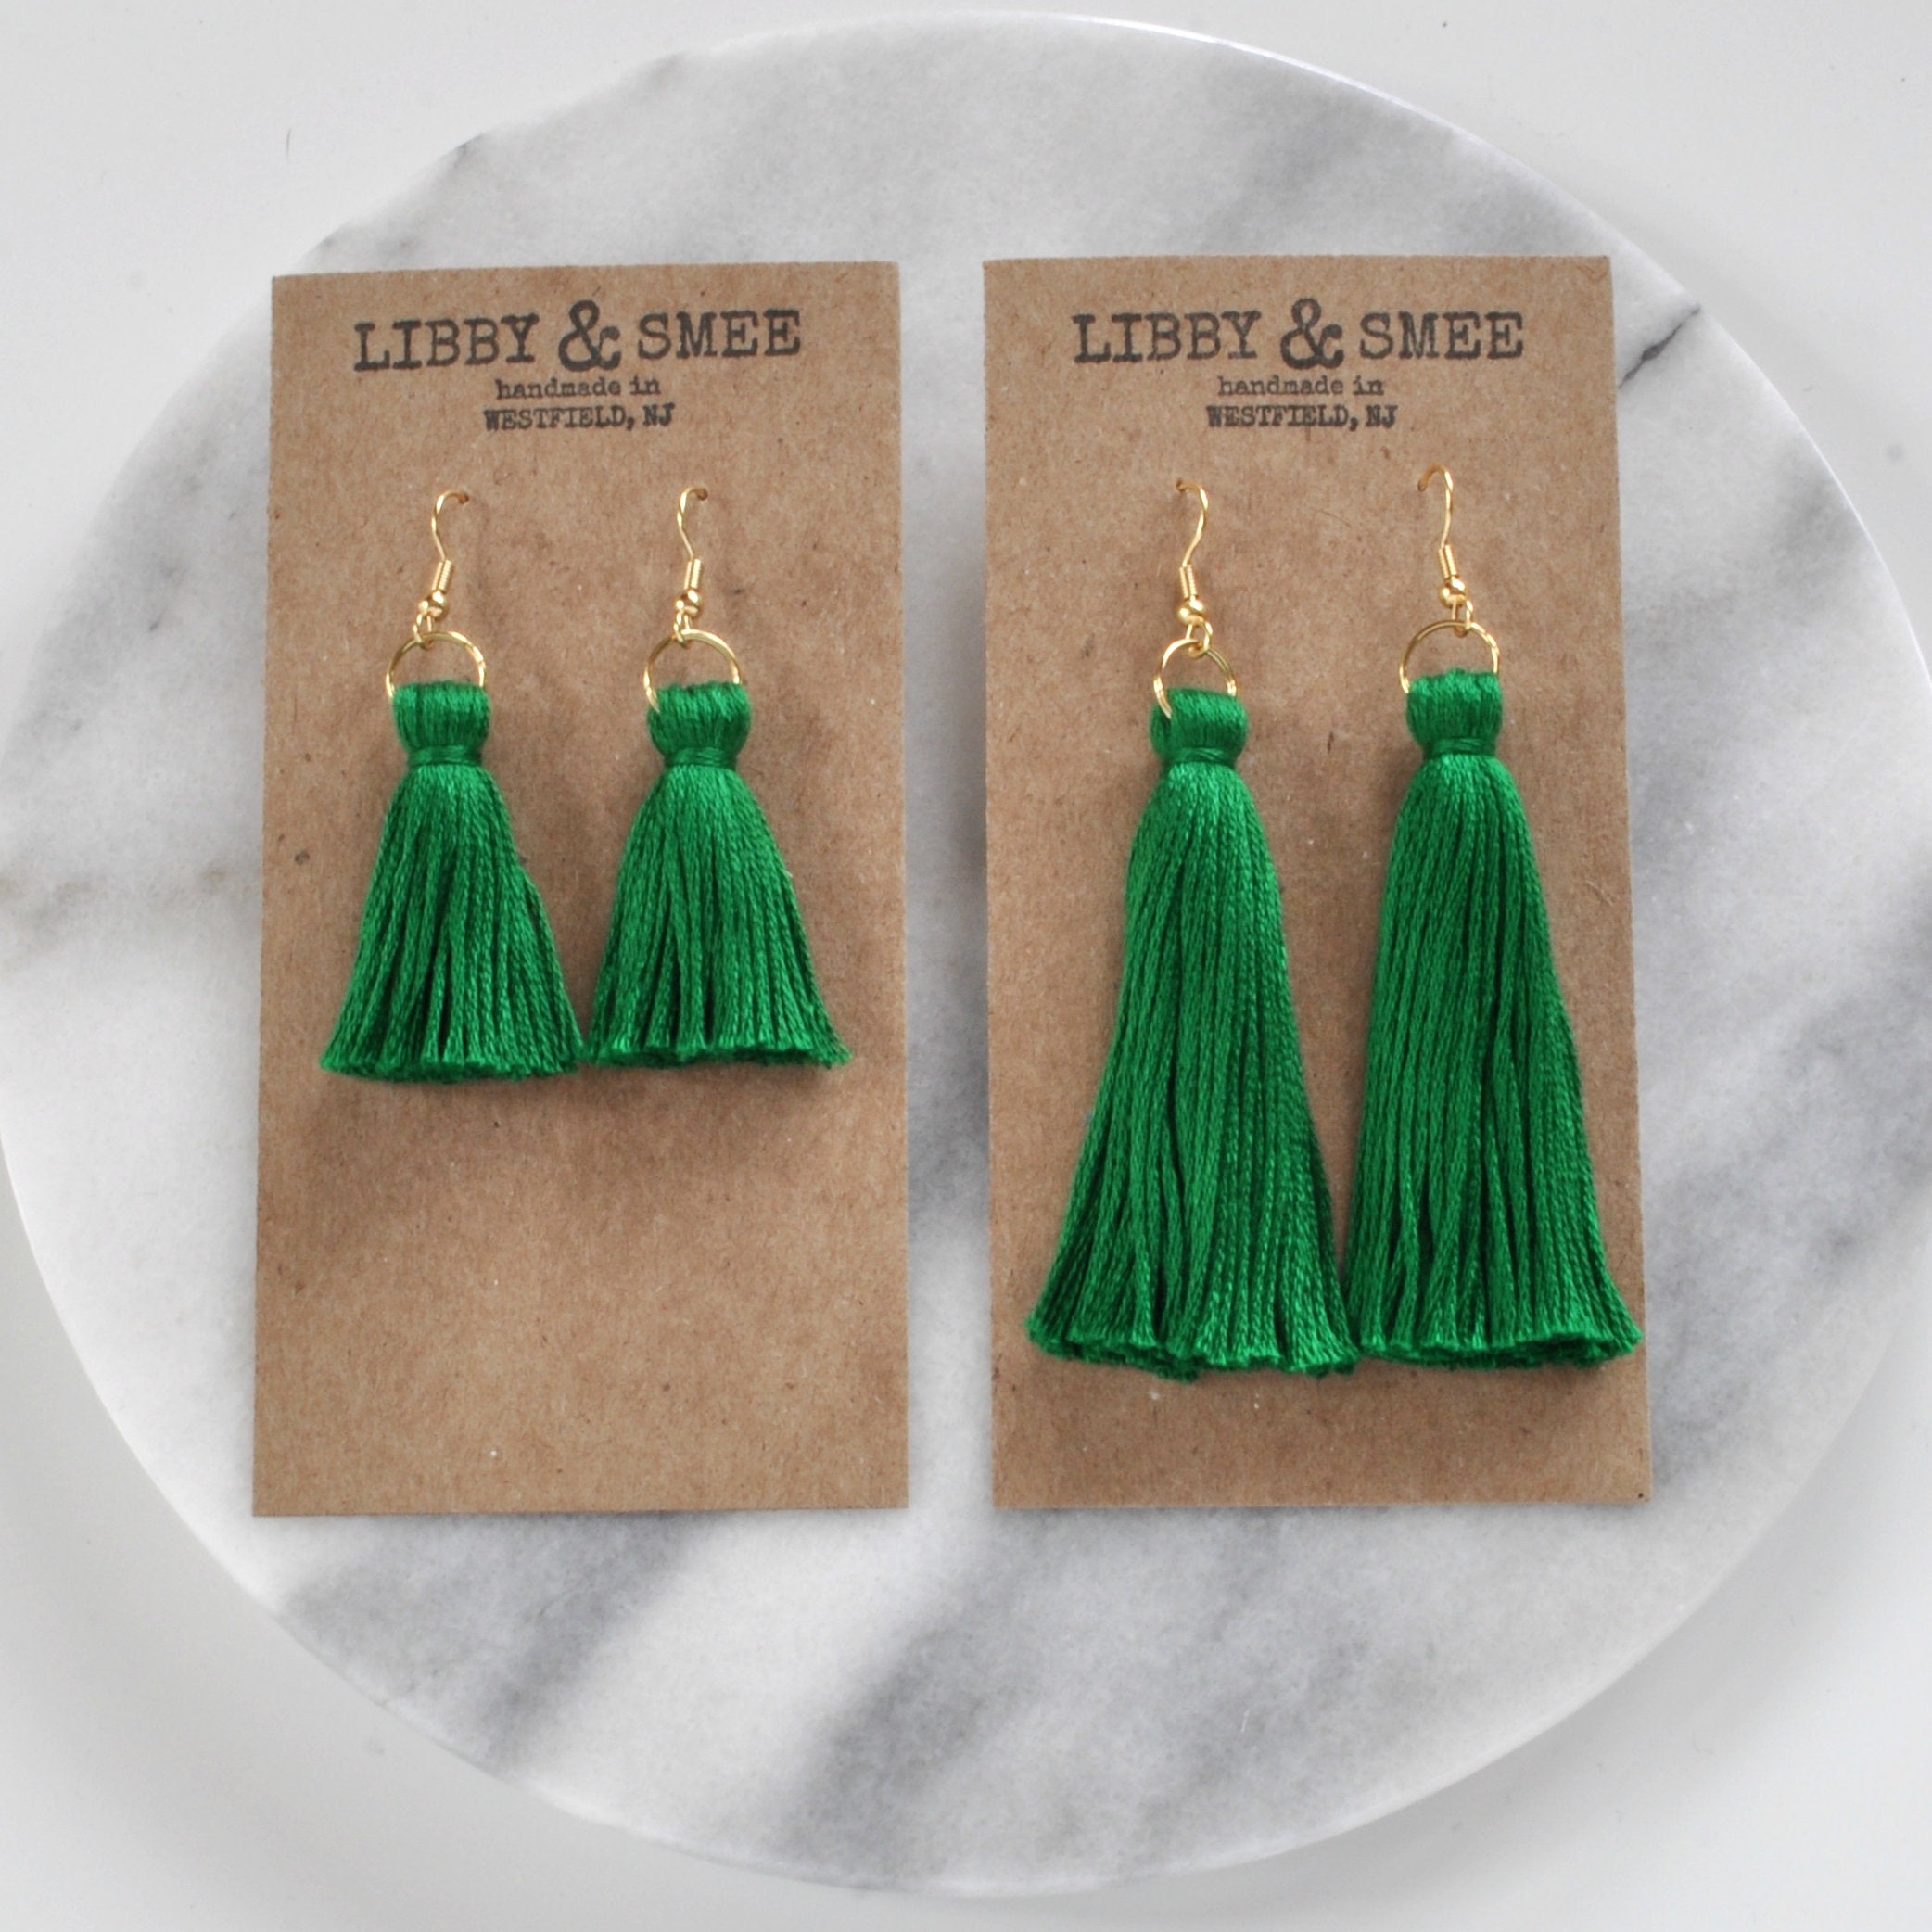 Emerald Green tassel earrings from Libby & Smee shown in mini and long sizes on logo-stamped kraft earring cards